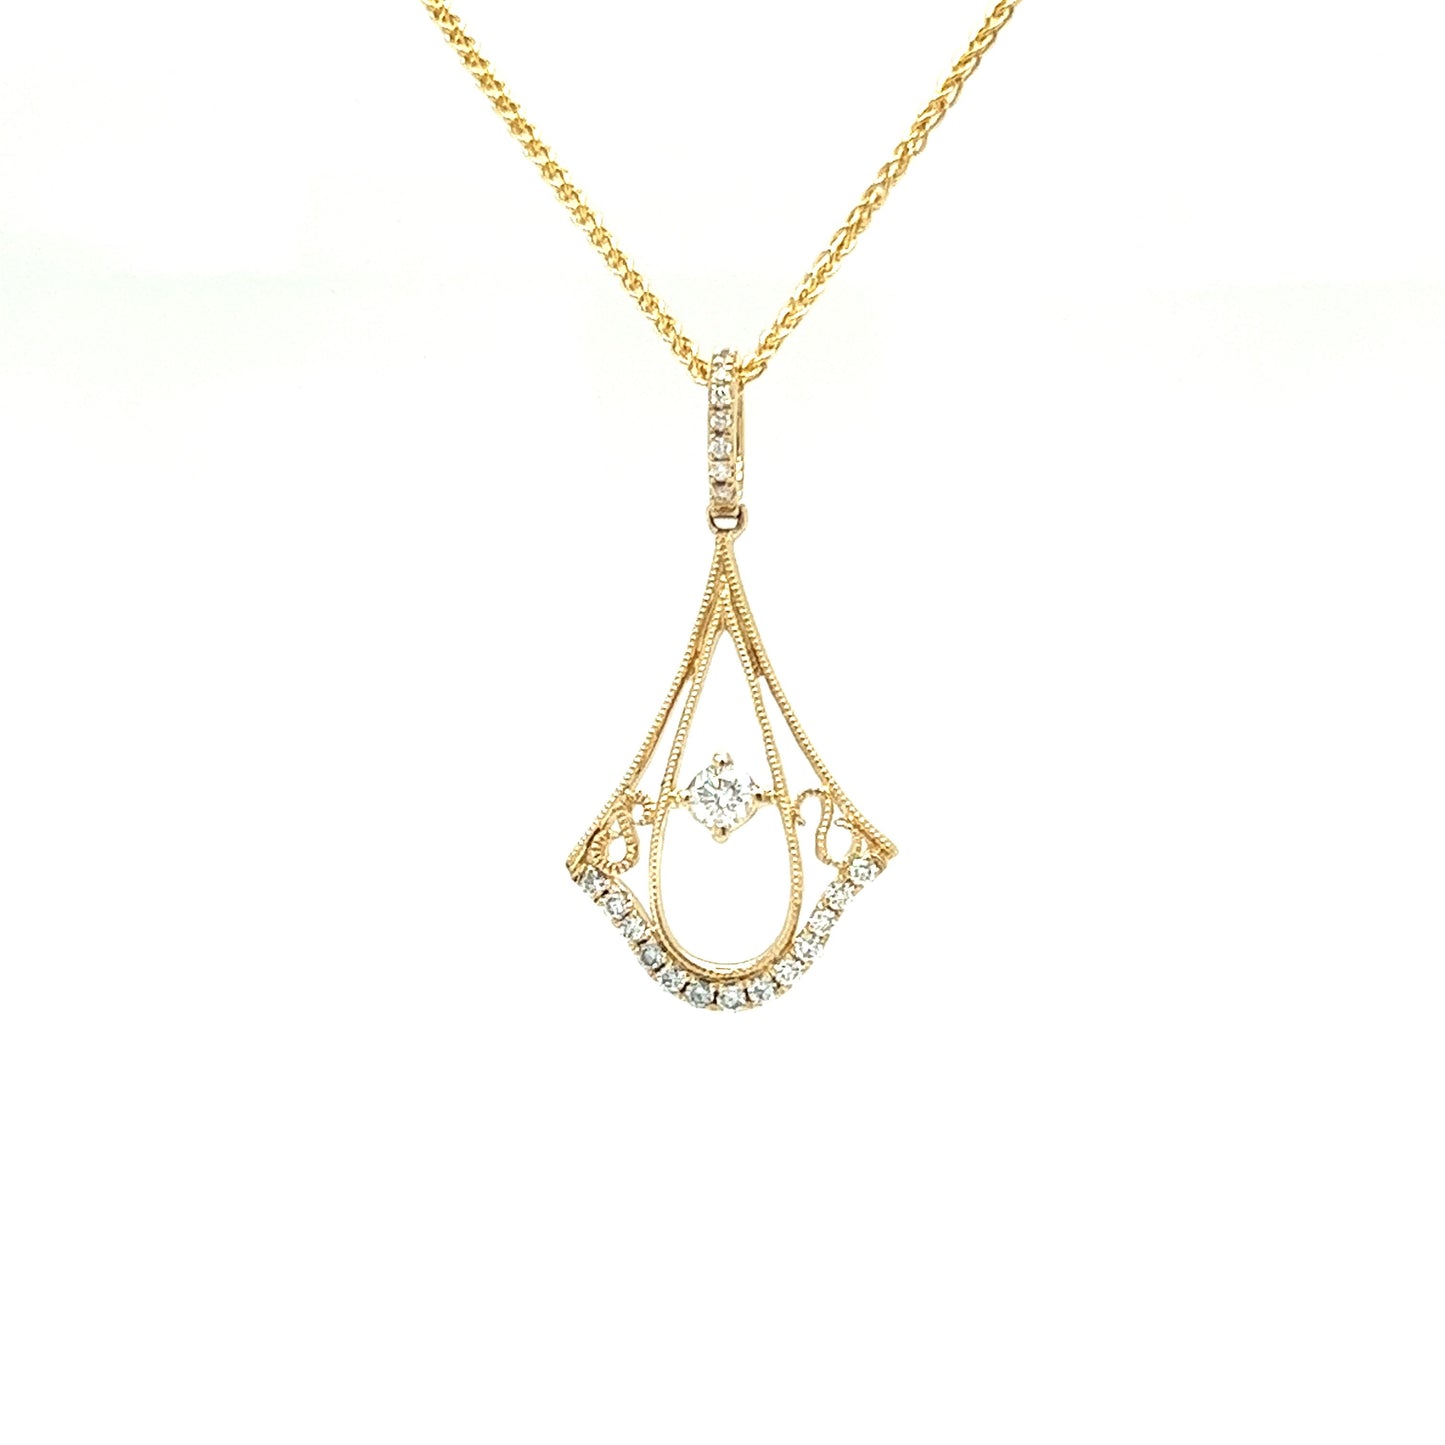 Fancy Pendulum Drop Pendant with 0.35ctw of Diamonds in 14K Yellow Gold Pendant and Chain Front View